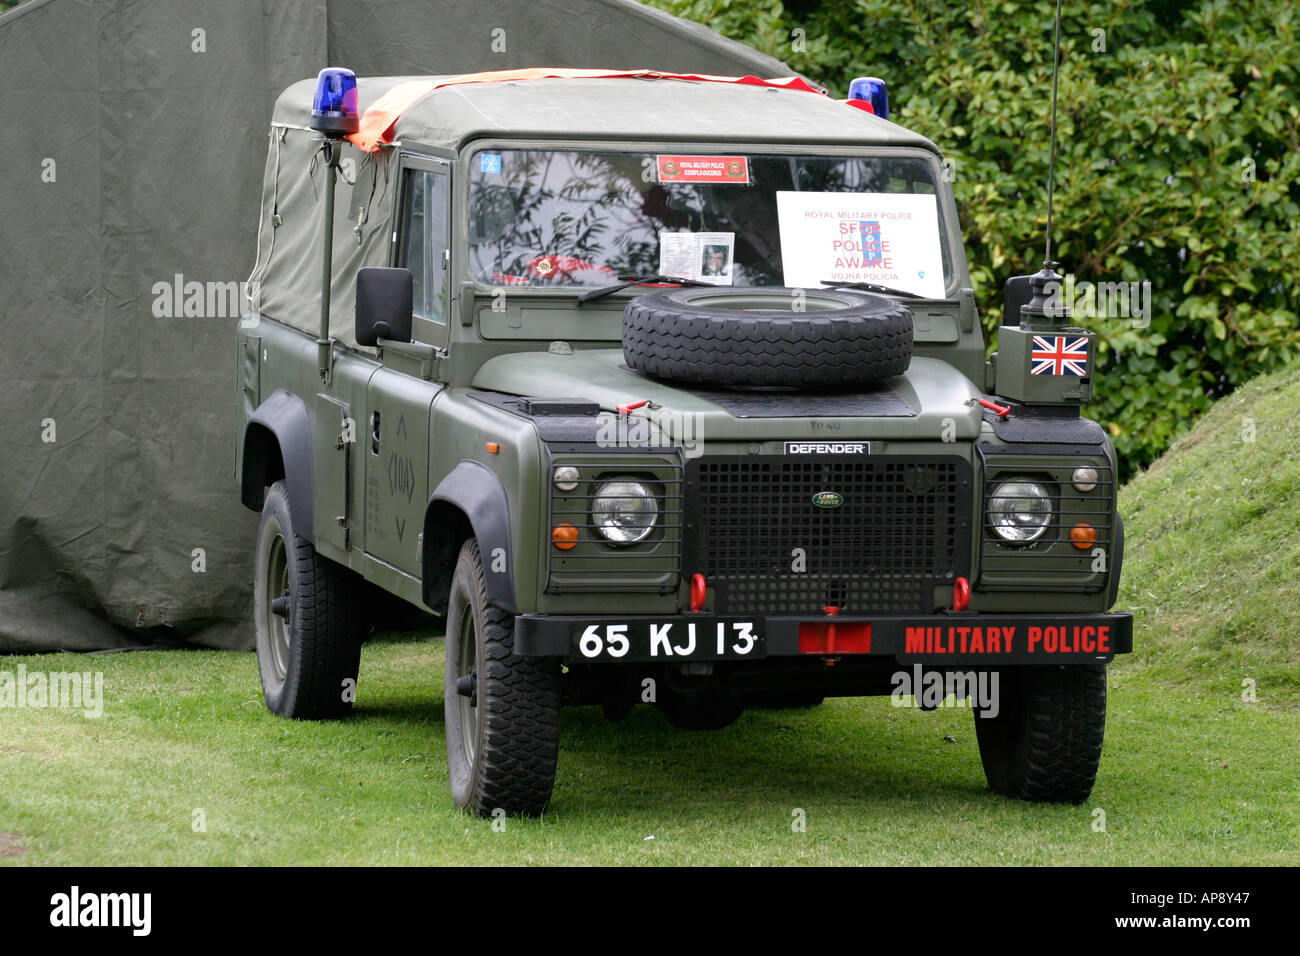 Share 79+ images land rover defender for sale northern ireland - In ...